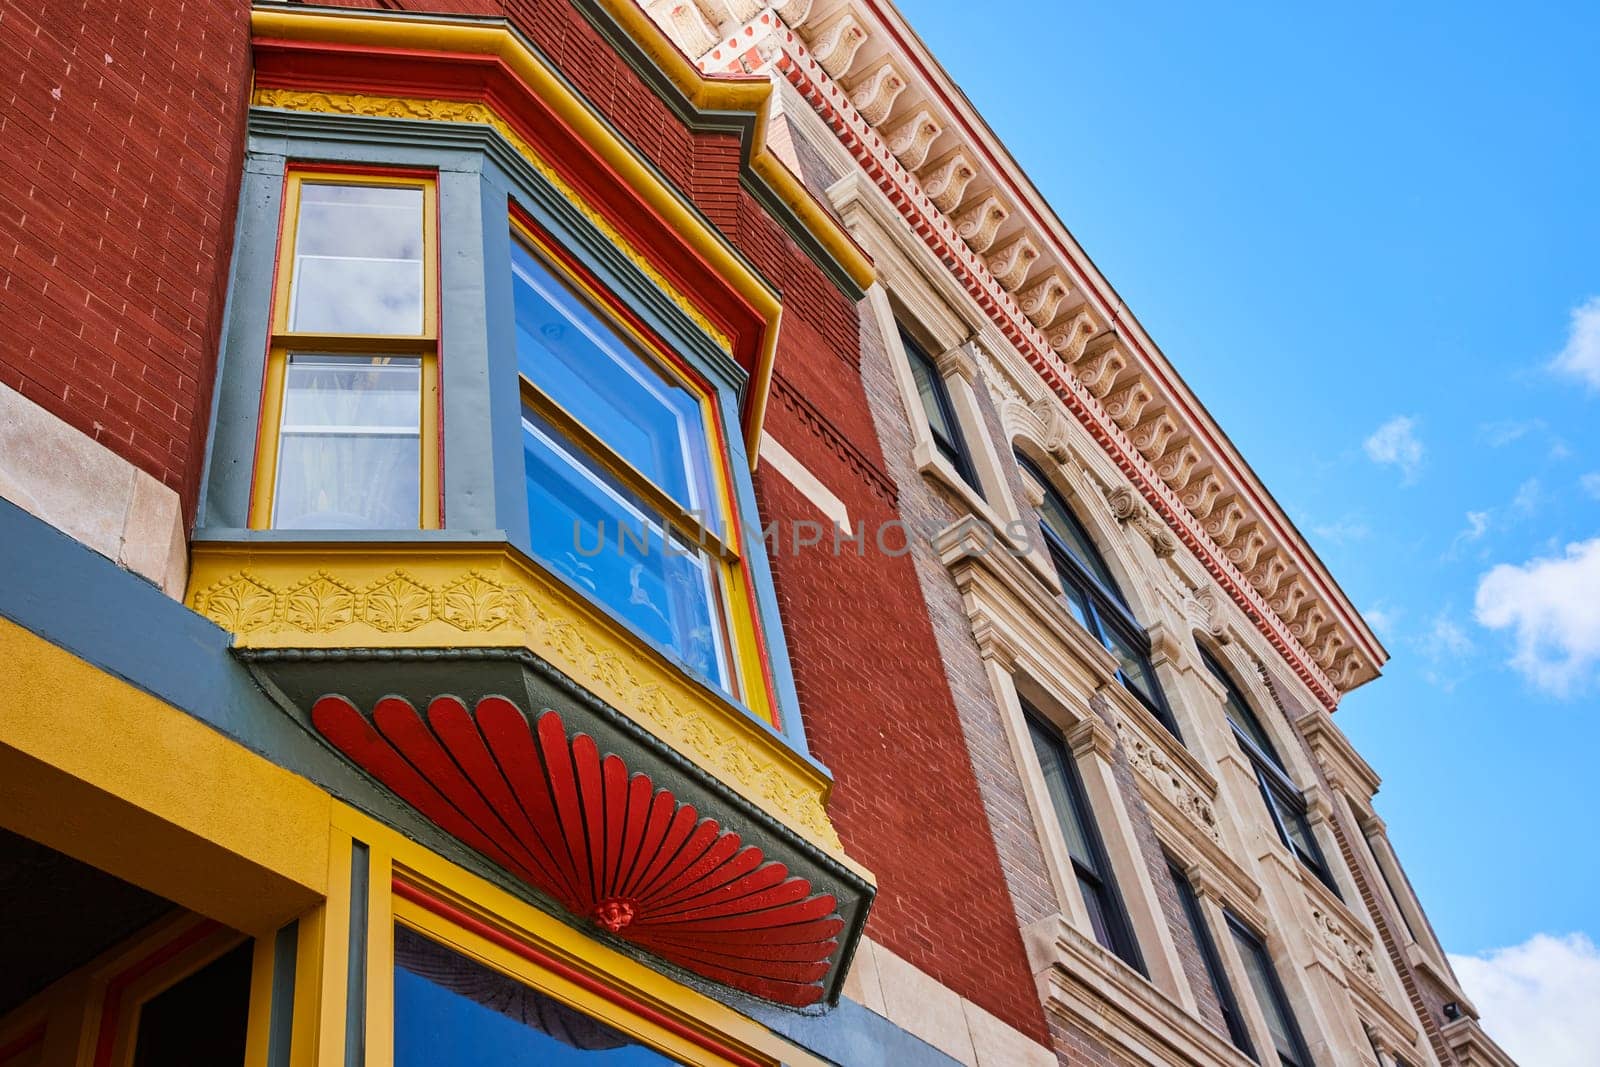 Vibrant contrast of old and new architecture in Downtown Muncie, Indiana under clear blue sky